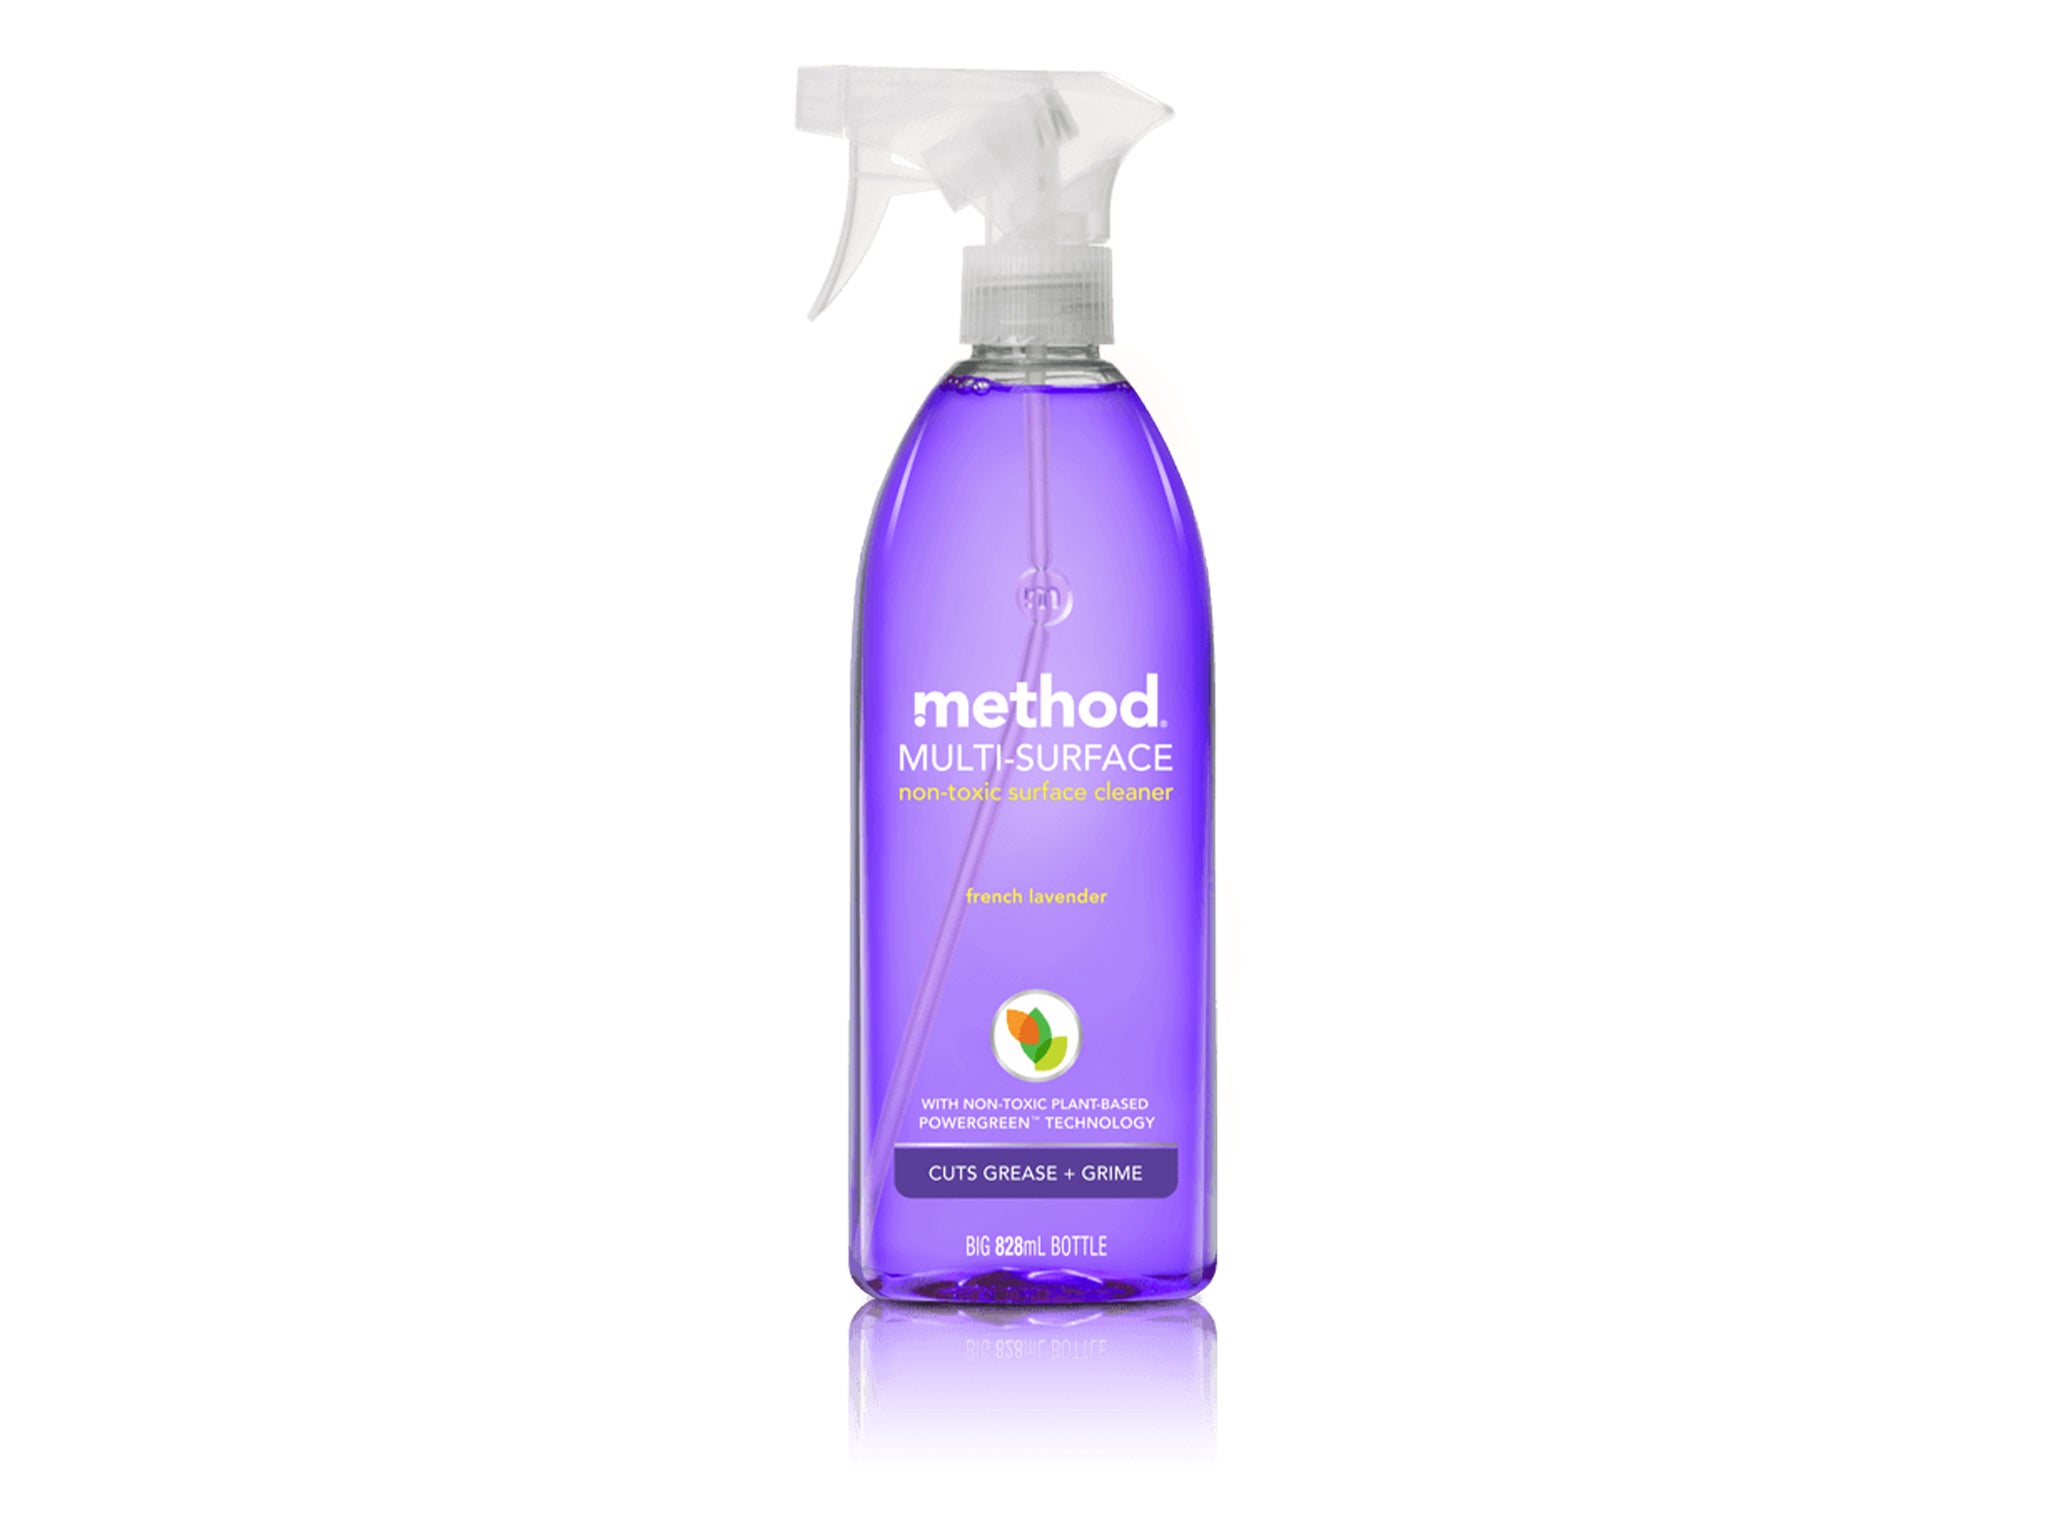 A daily spray and wipe with this surface cleanser will keep germs at bay (Method)